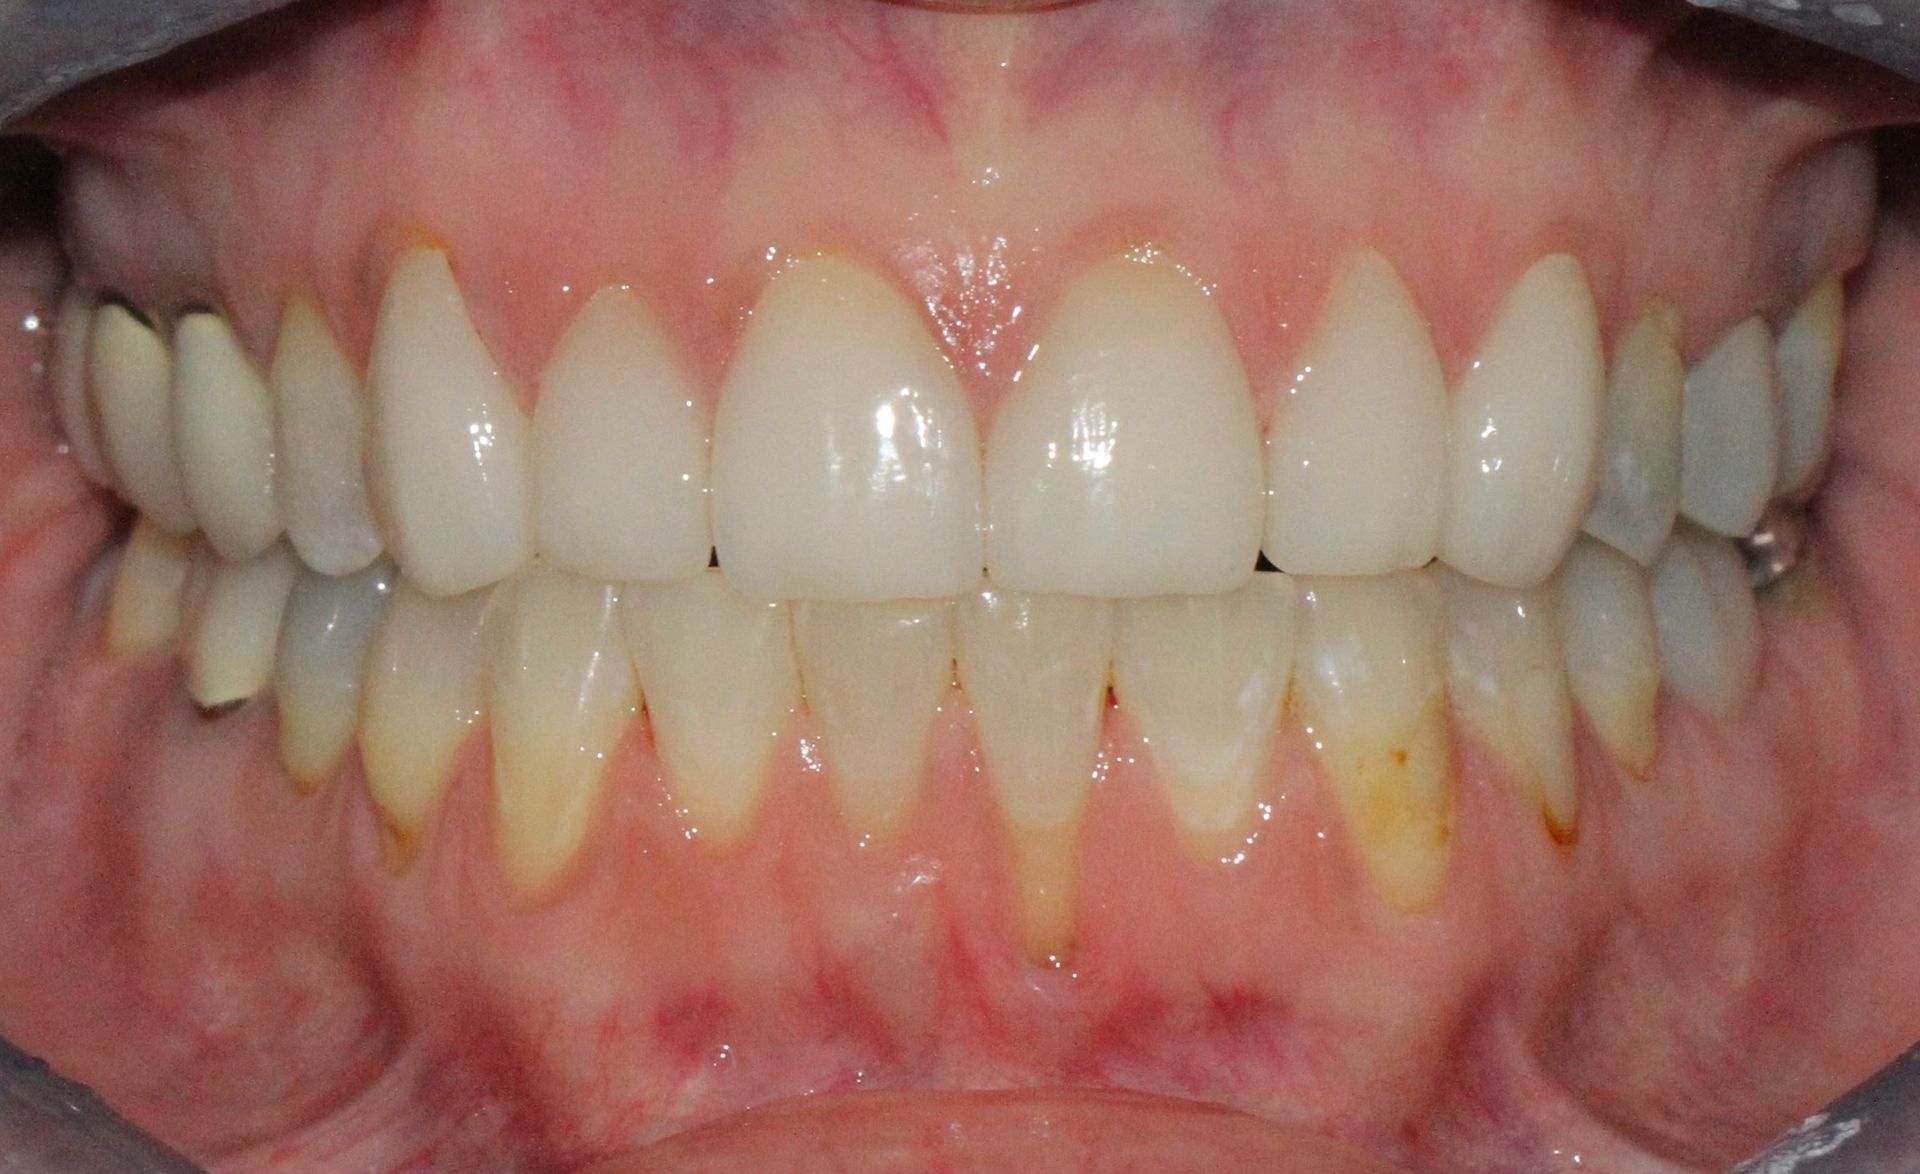 A close up of a person 's teeth with white teeth.